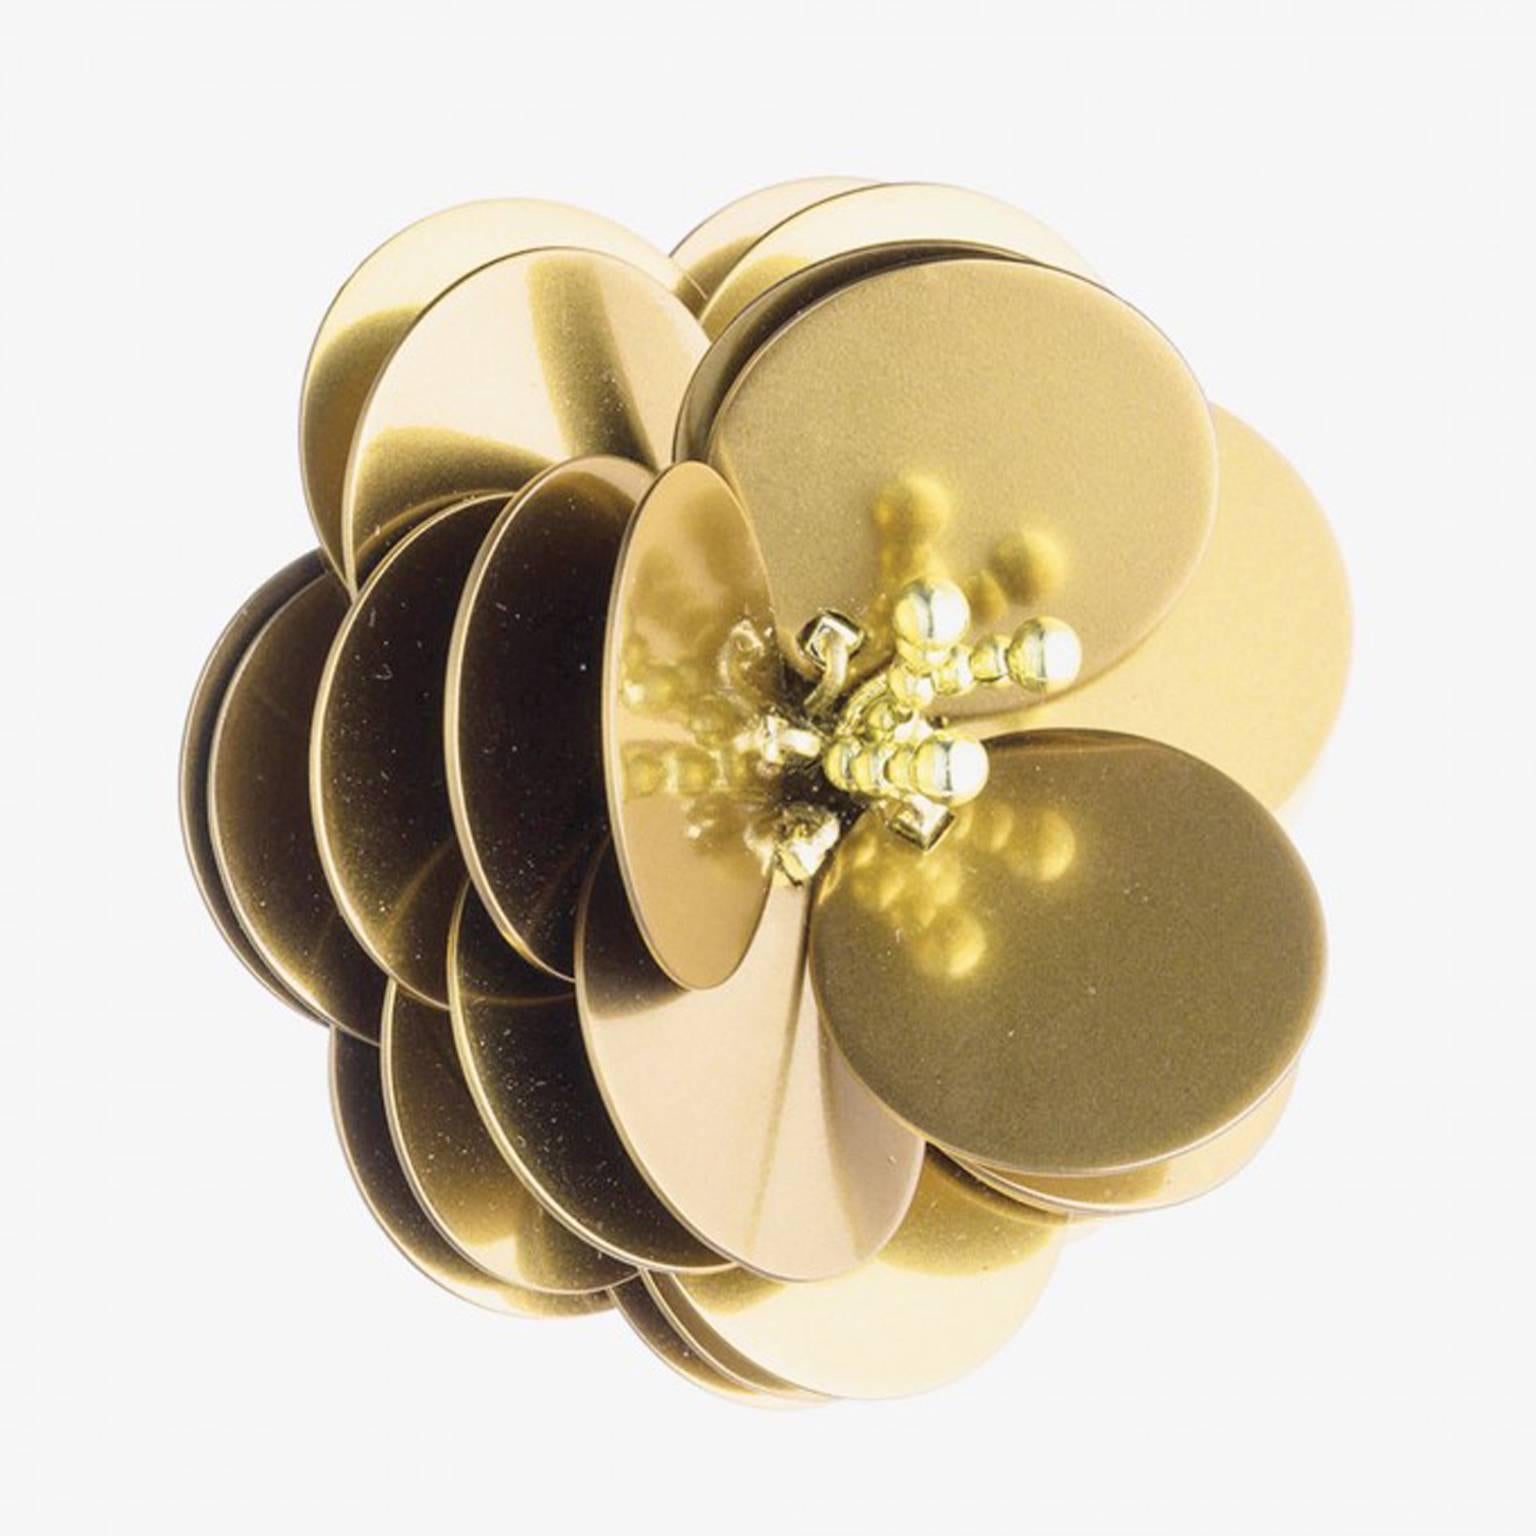 Flower earrings in Yellow gold plate. Post and butterfly backing with clip for extra support.
